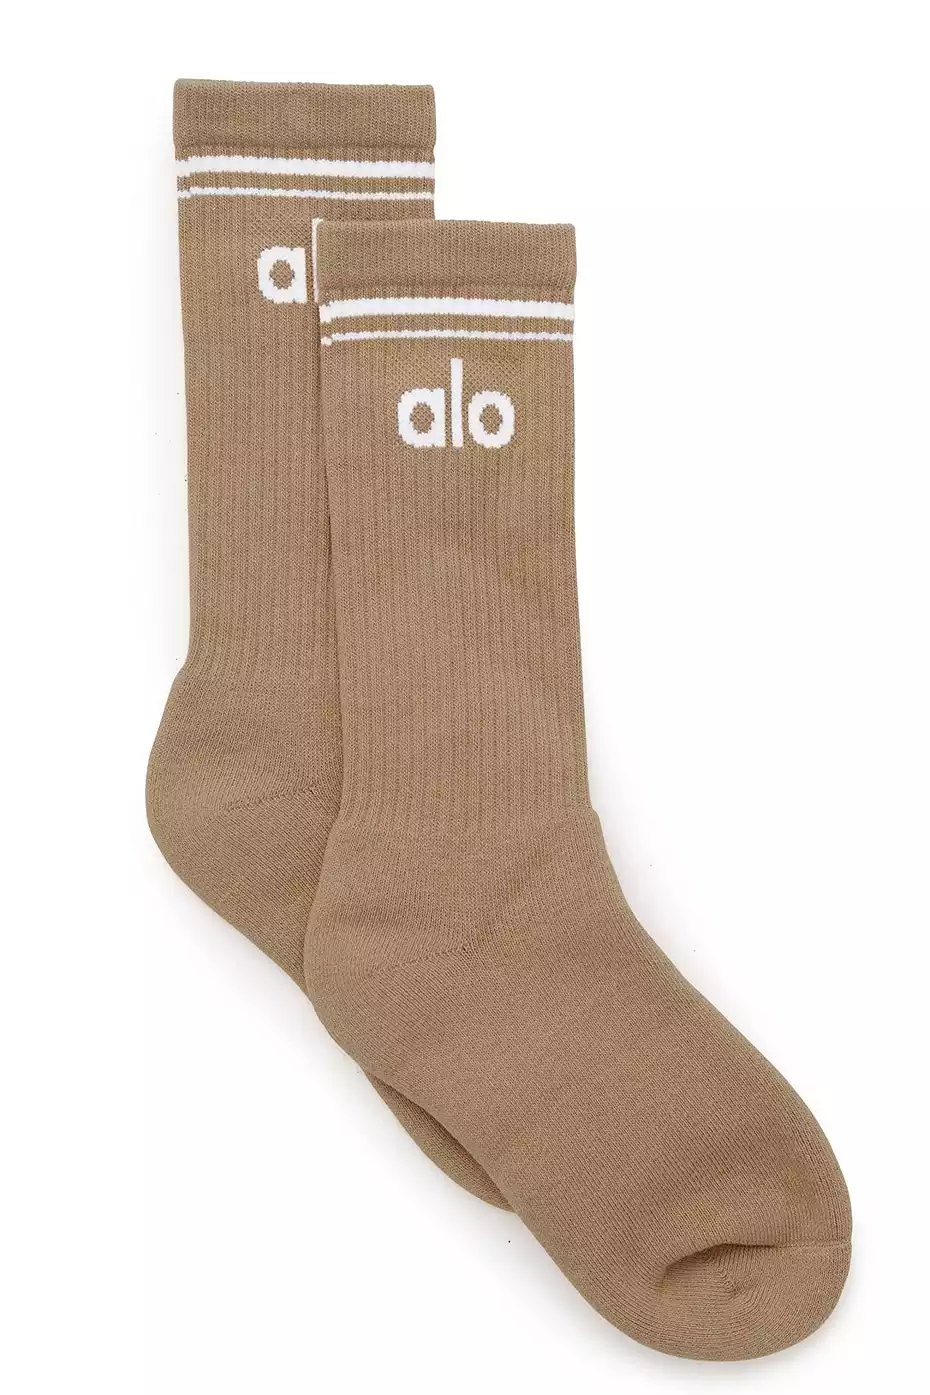 Find Promotion Alo Yoga Unisex Throwback Sock Gravel/White with a